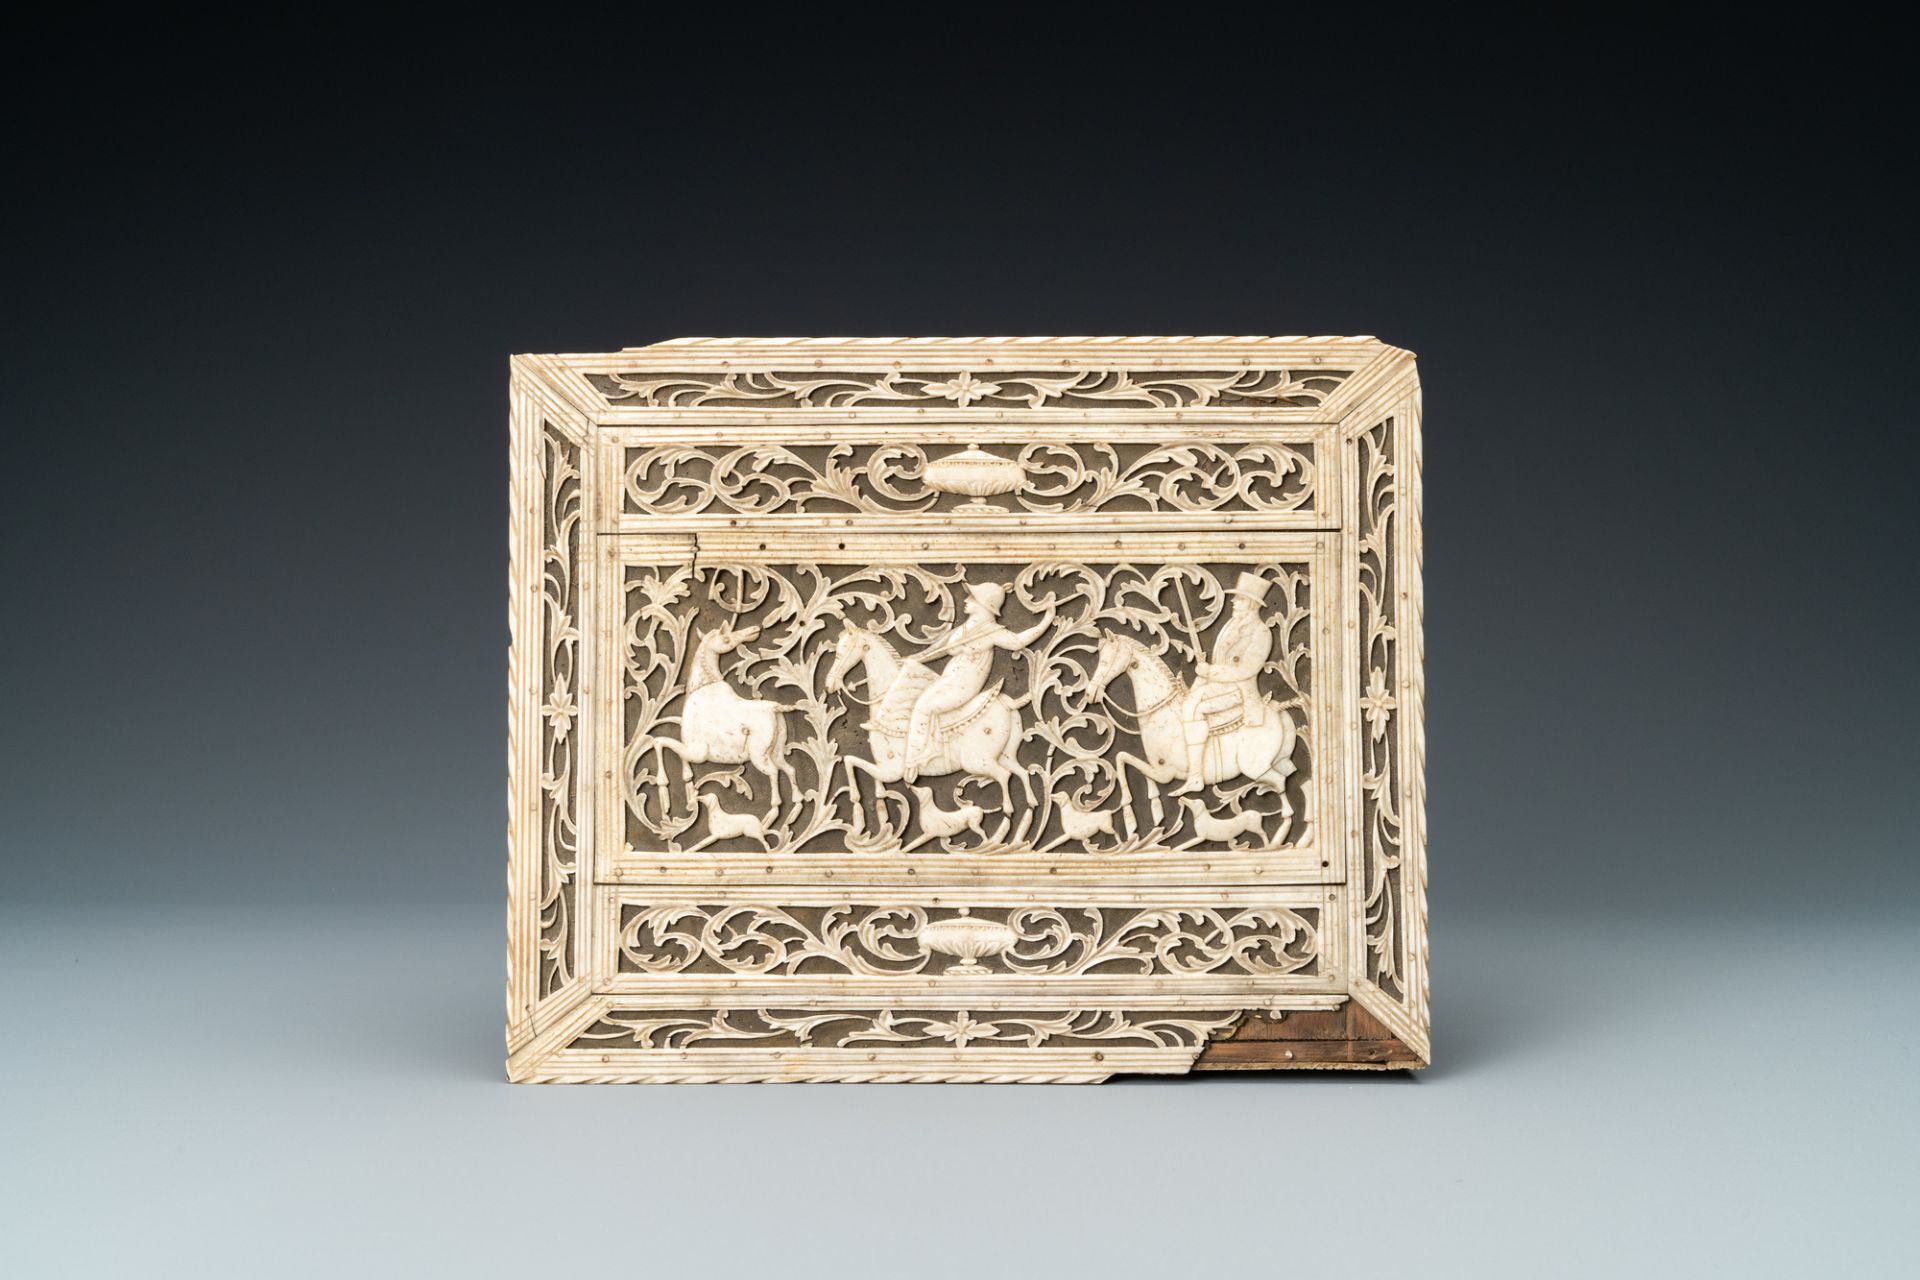 A reticulated bone and wood hunting scene box, Arkhangelsk, Kholmogory, Russia, 18th C. - Image 4 of 9